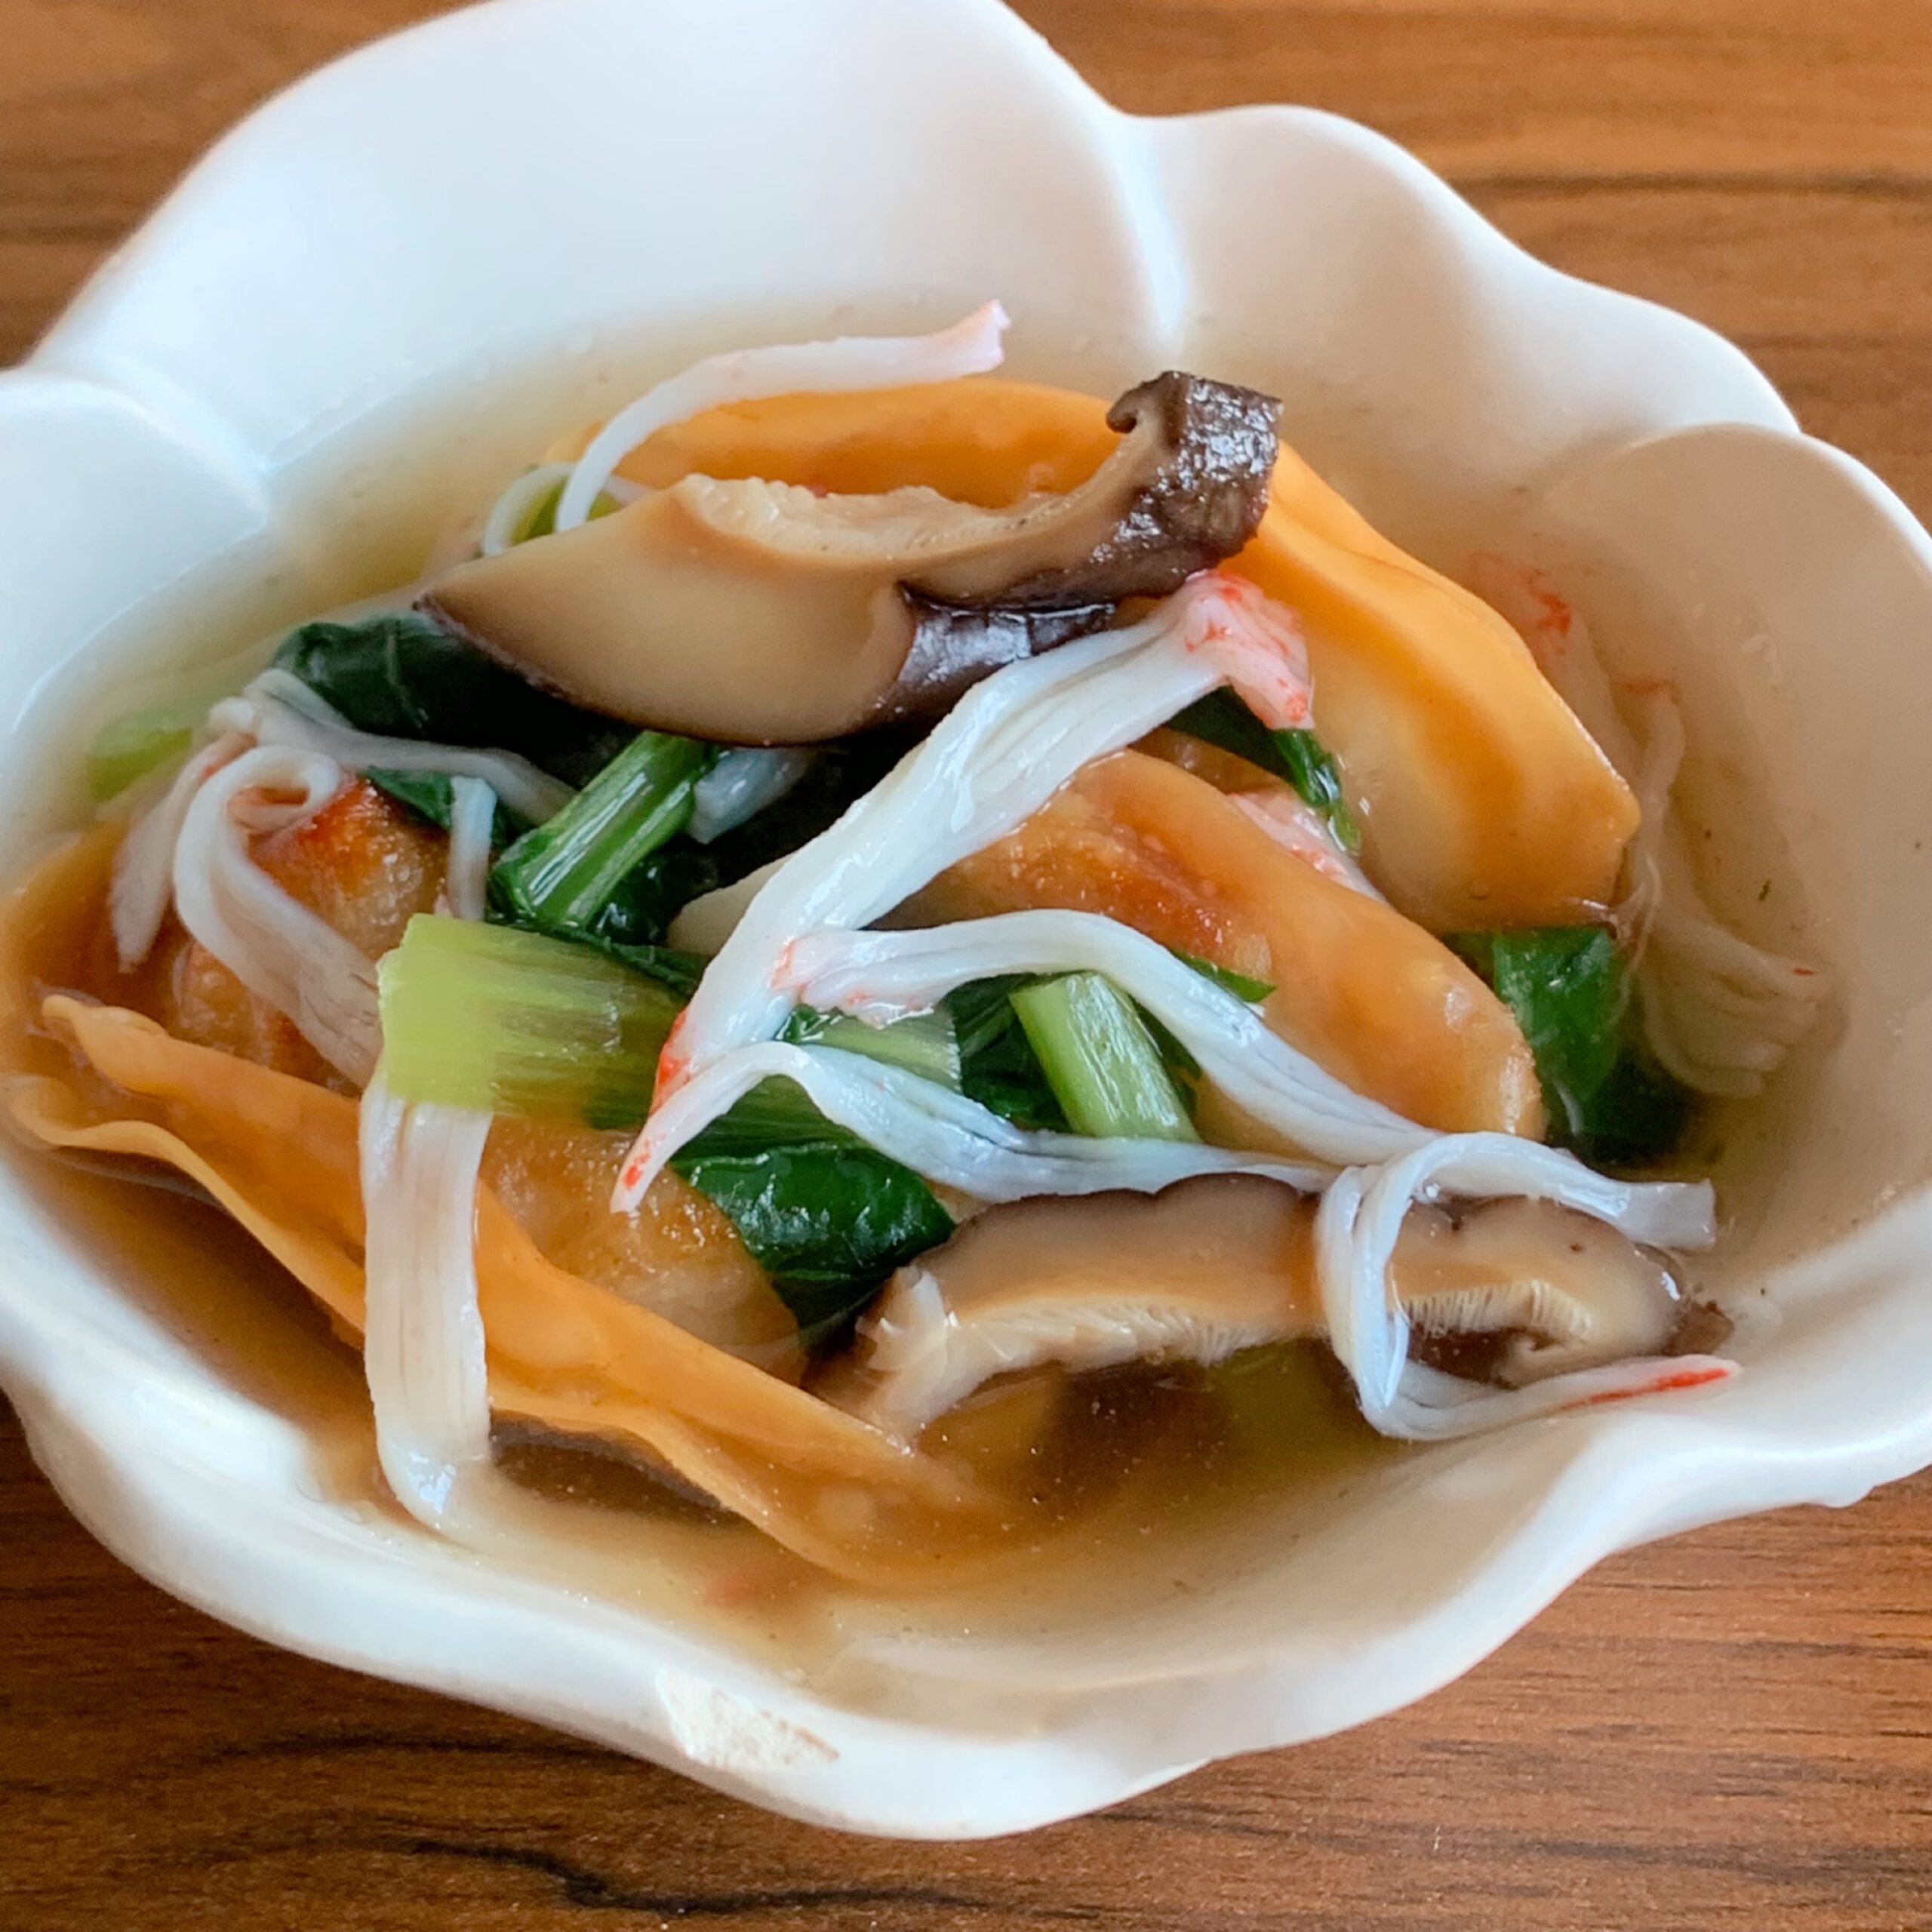 It is a dish in which ready-made dumplings are fried in oil and eaten with a thickened sauce sauce.